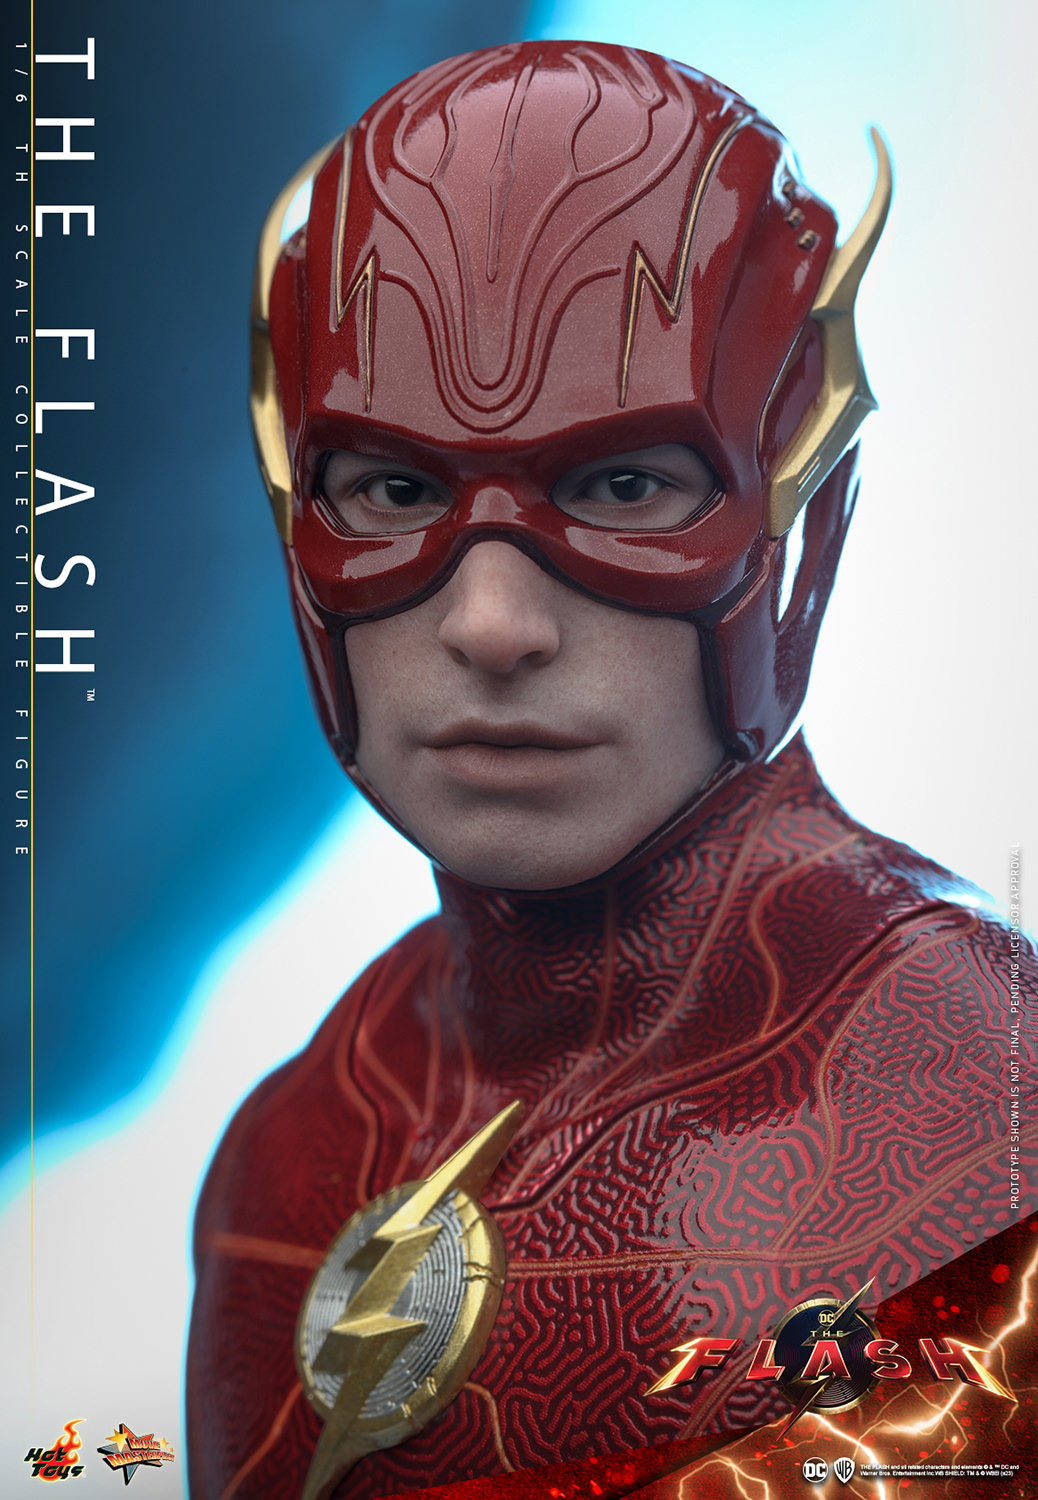 The Flash (Special Edition) (Prototype Shown) View 16